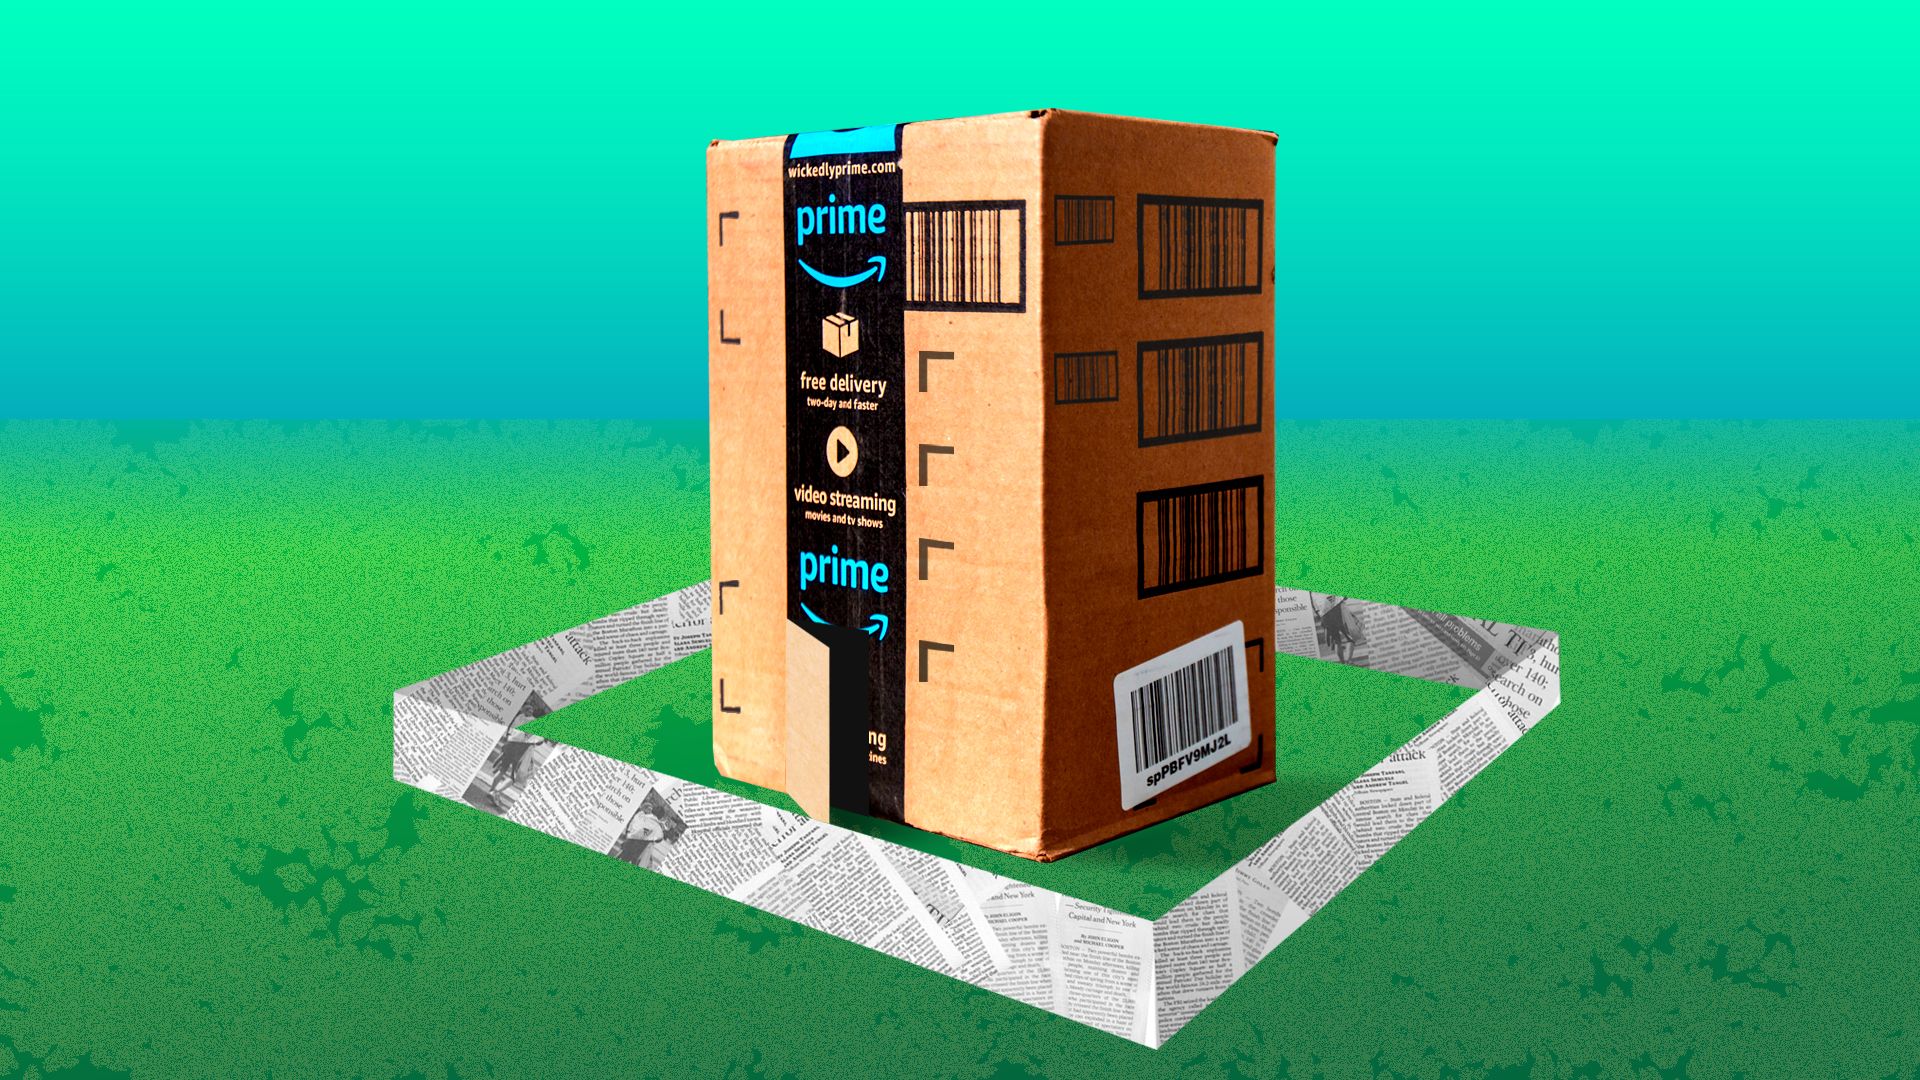 Illustration of an Amazon package surrounded by a newspaper fence